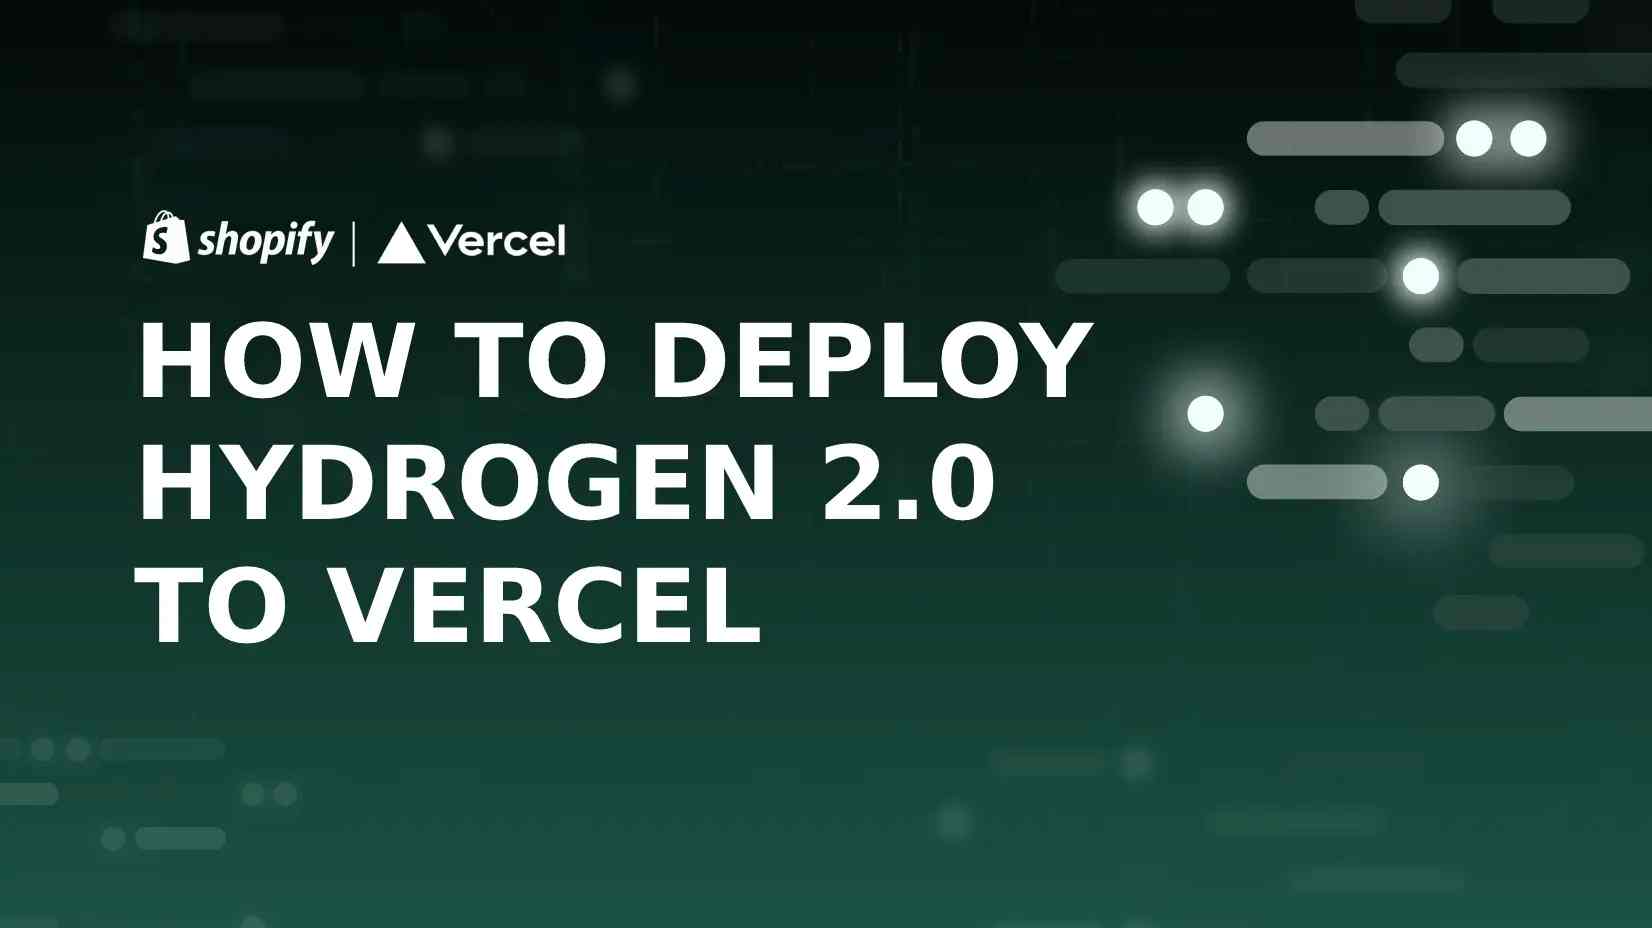 How to deploy shopify hydrogen 2 to vercel